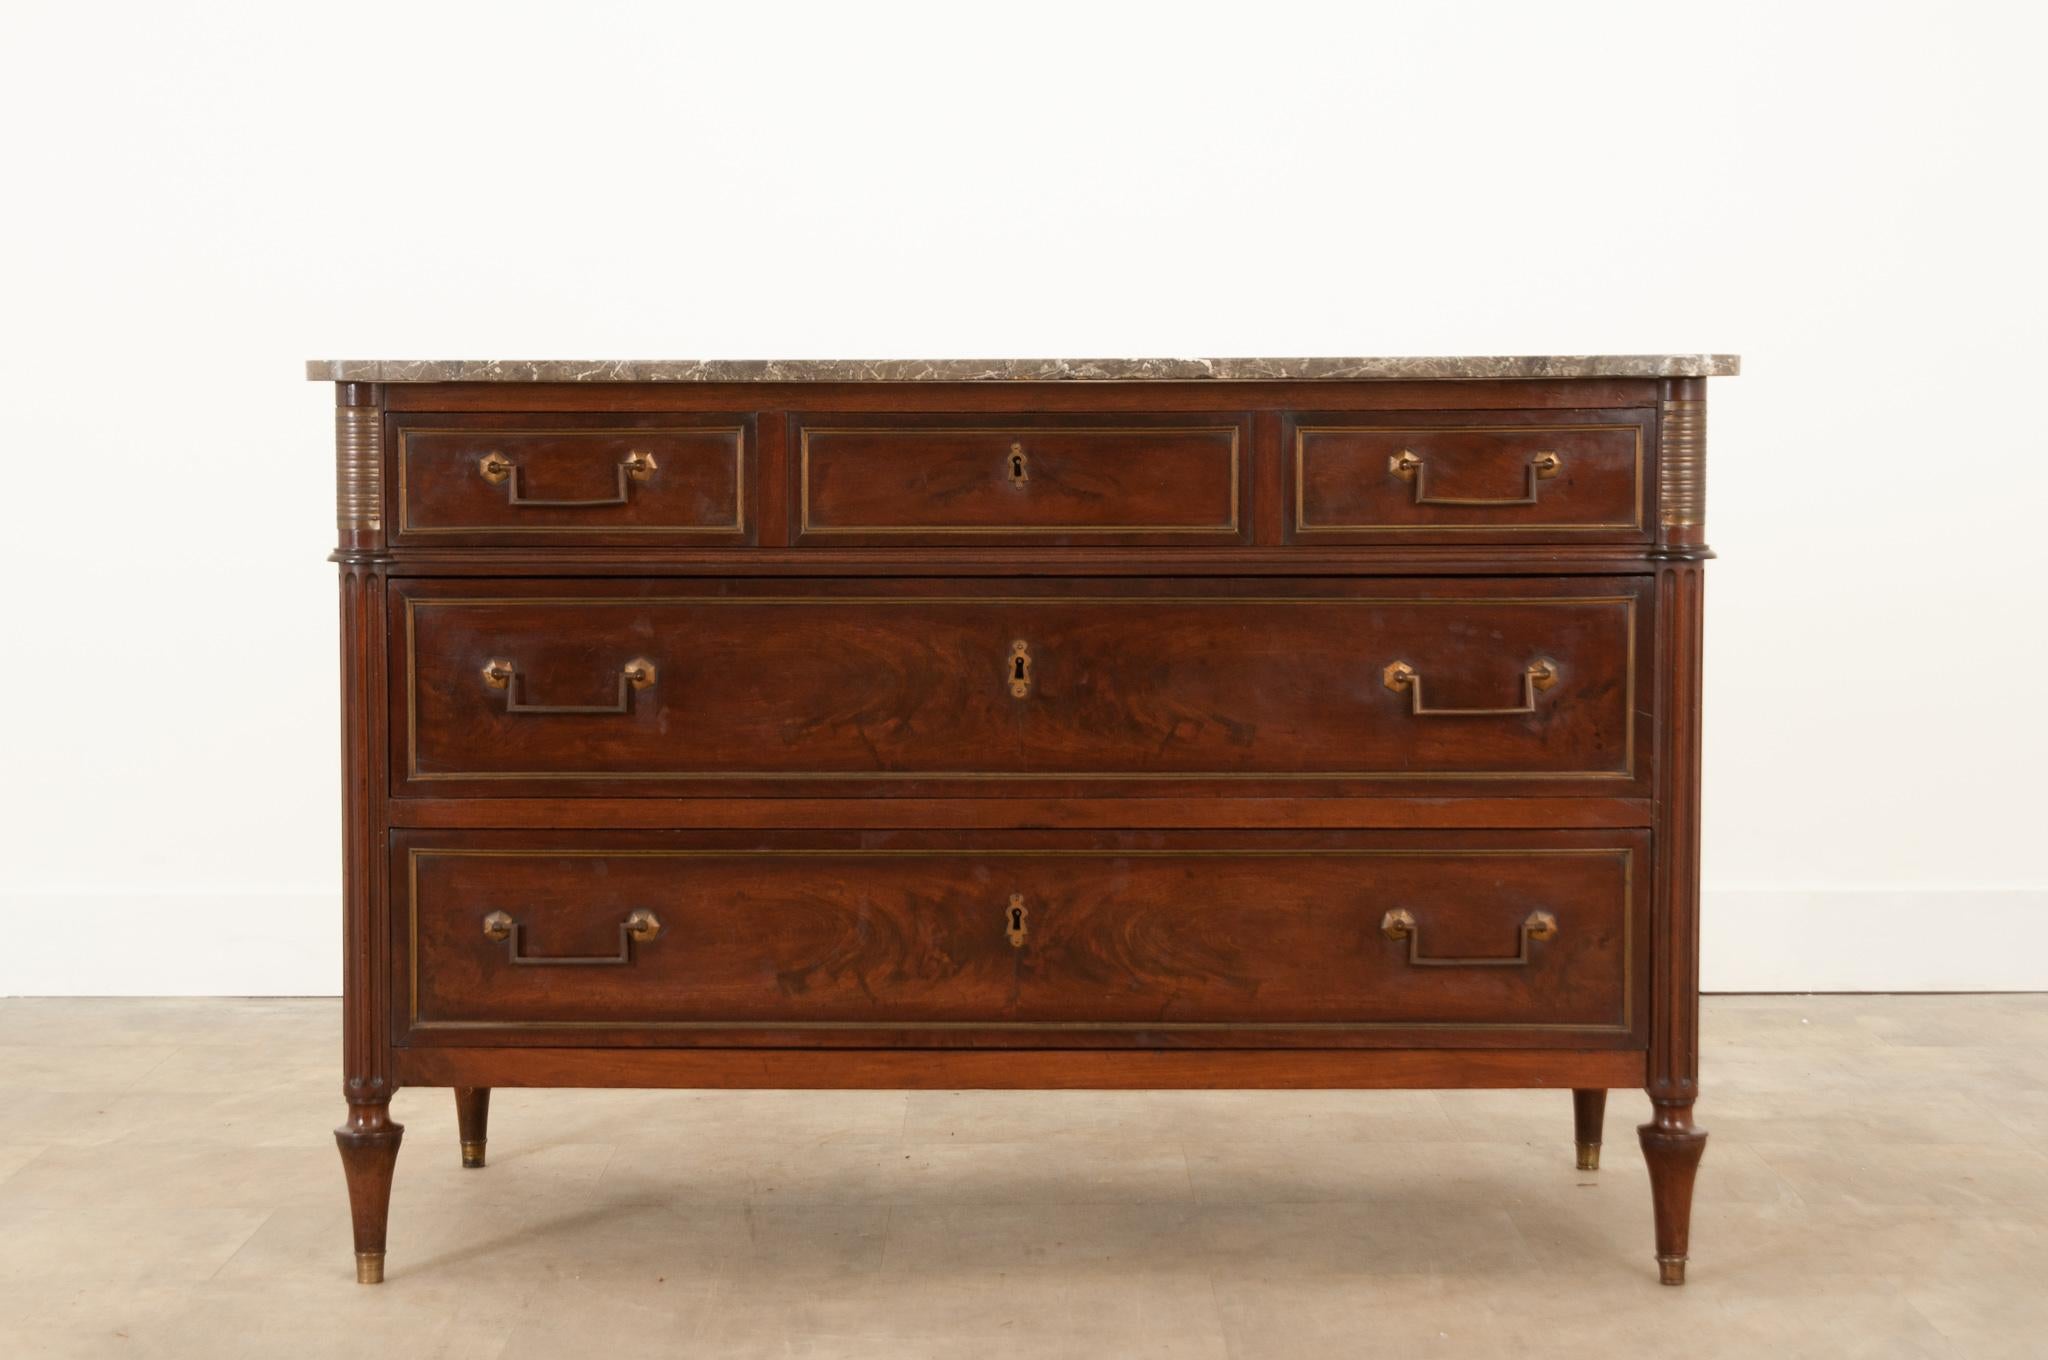 A stately Louis XVI style mahogany commode from 19th century France. Its original charcoal and white, shaped marble top is removable. A bank of three drawers are inset with brass paneling and easy to use brass hardware. The locks no longer function.